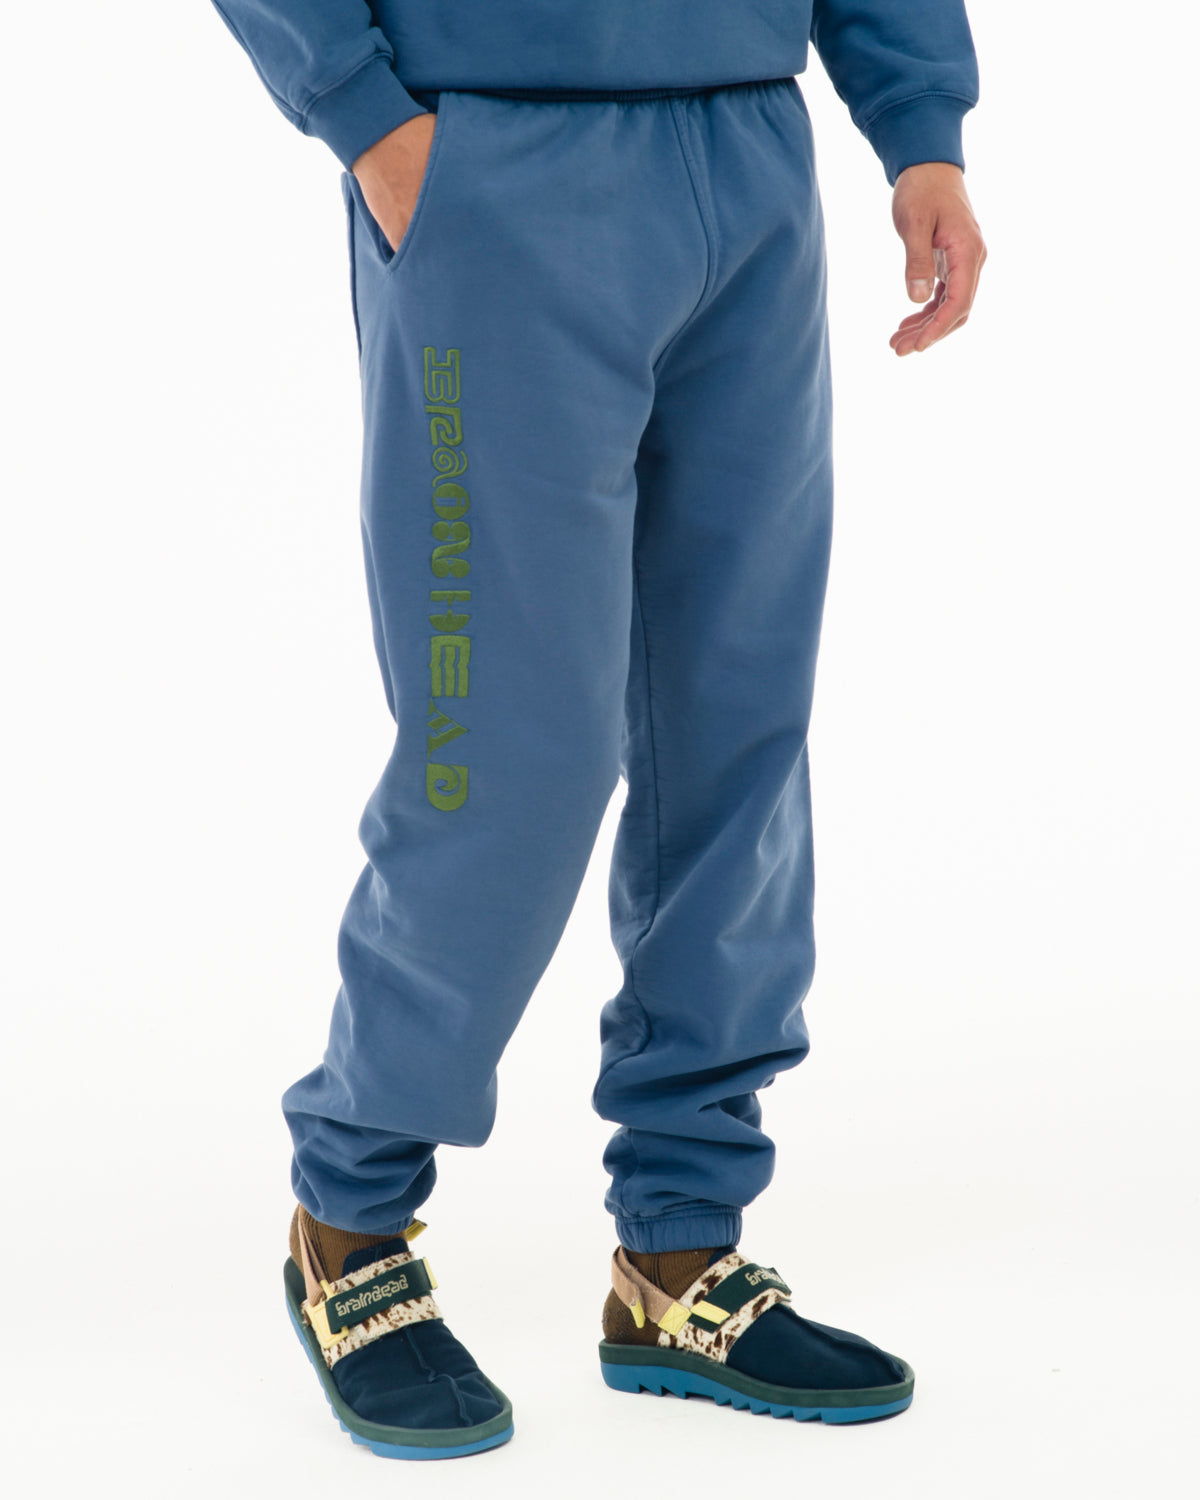 Heavyweight Embroidered Sweatpants - Blue 5